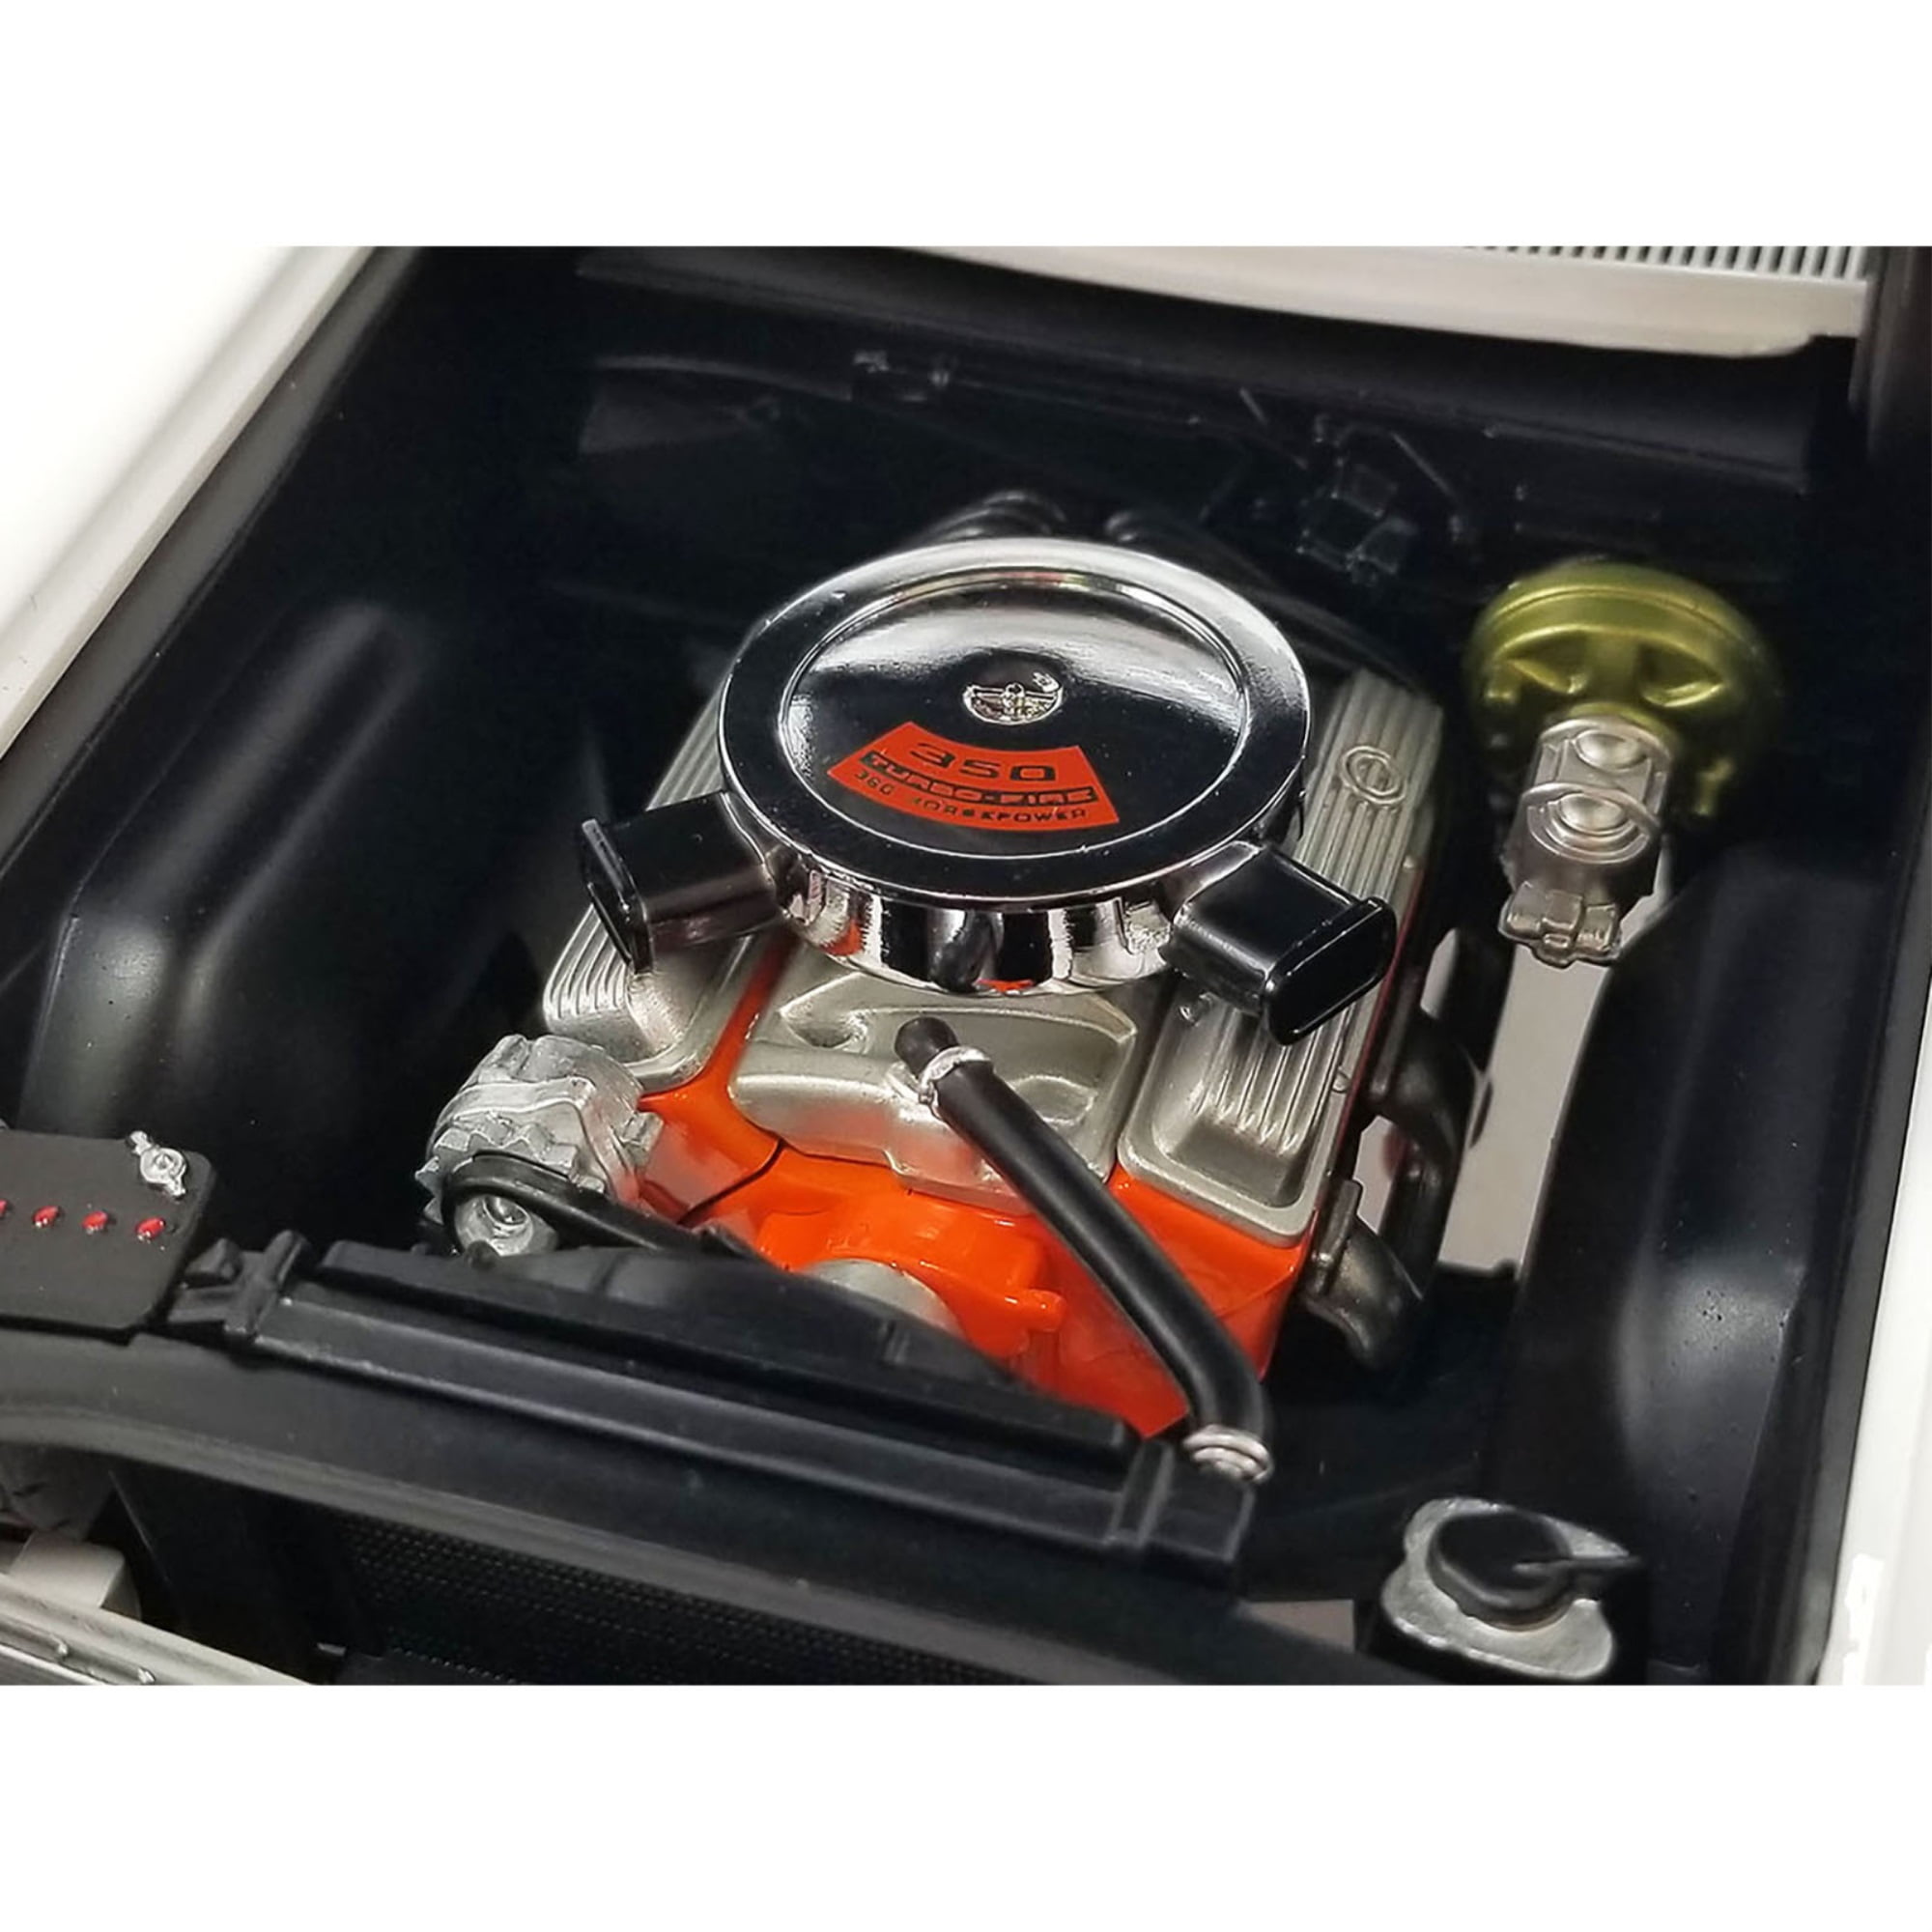 Picture of GMP 18982 1-18 Scale 1970 Chevrolet Nova SS White with Graphics Hurst - Name the Shifter Contest Grand Prize Limited Edition to Worldwide Diecast Model Car - 564 Piece